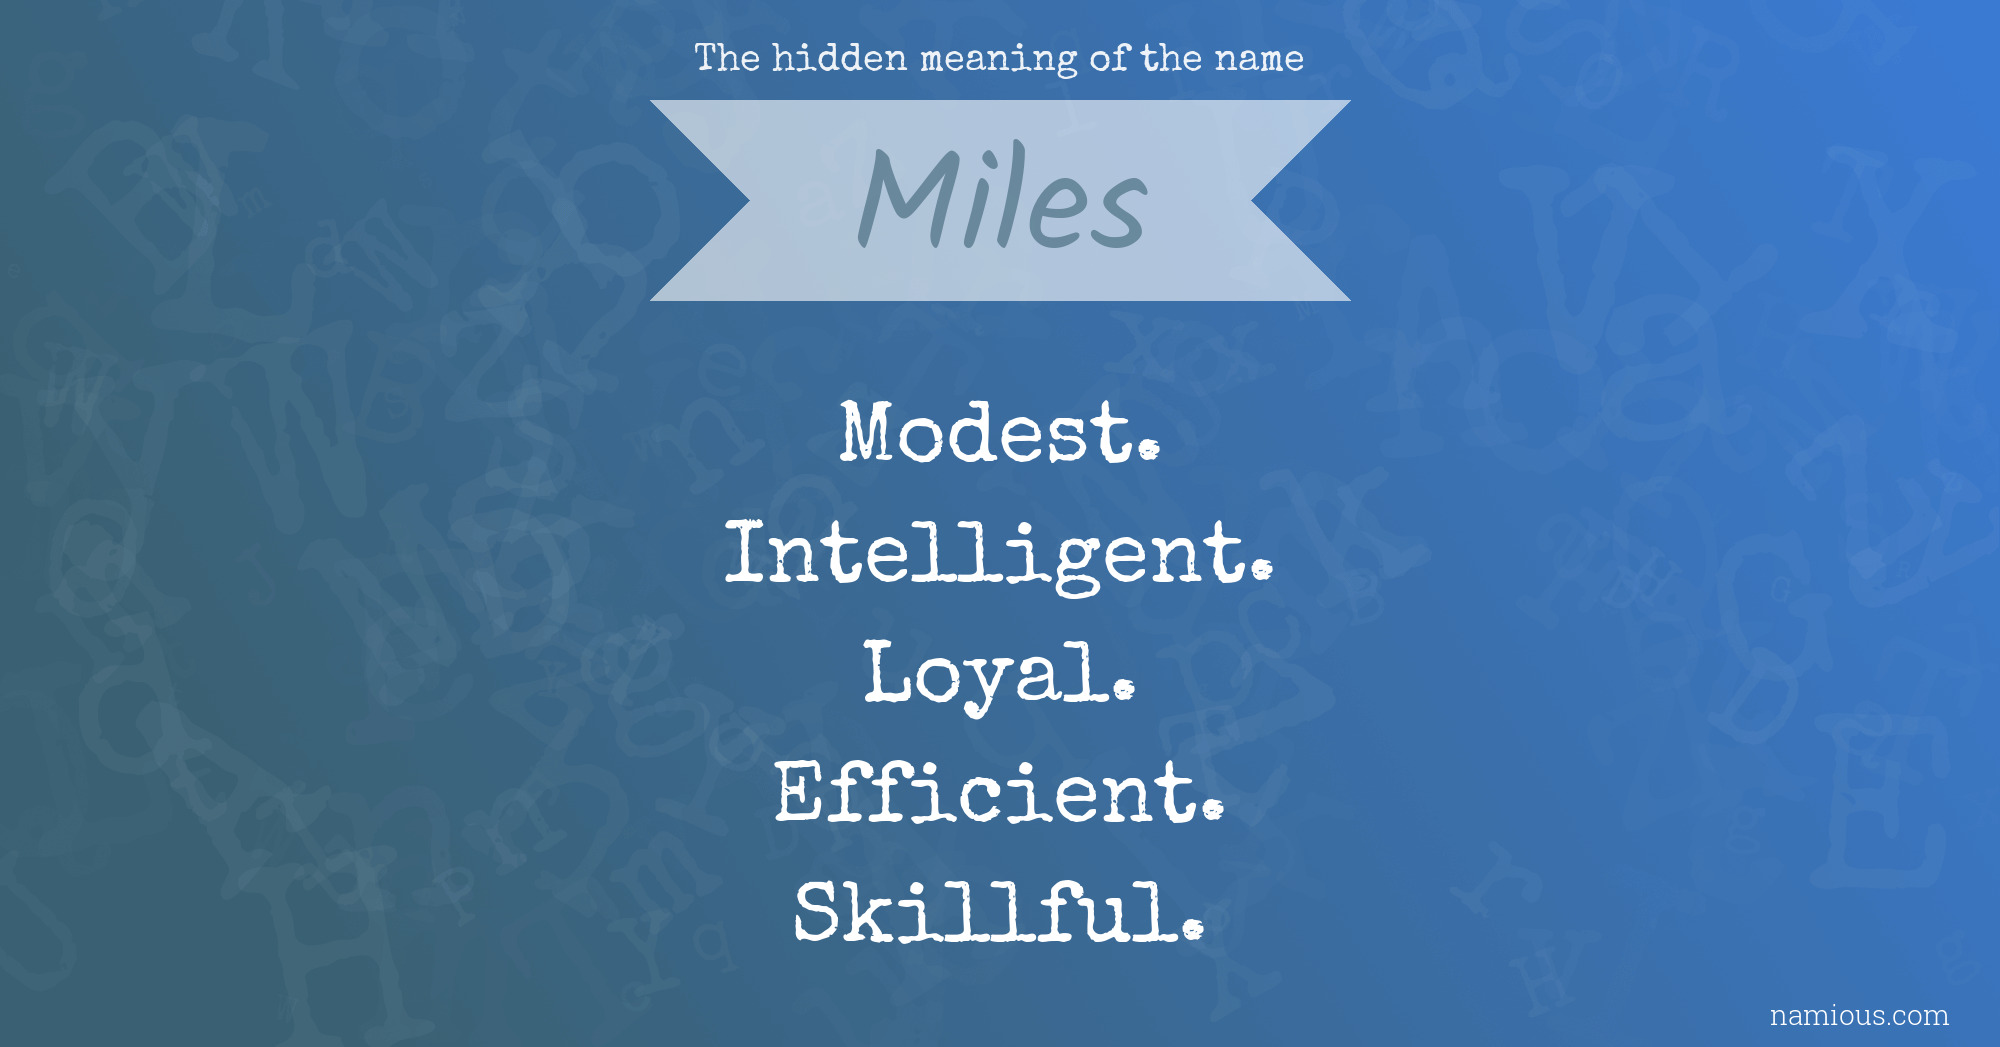 The hidden meaning of the name Miles